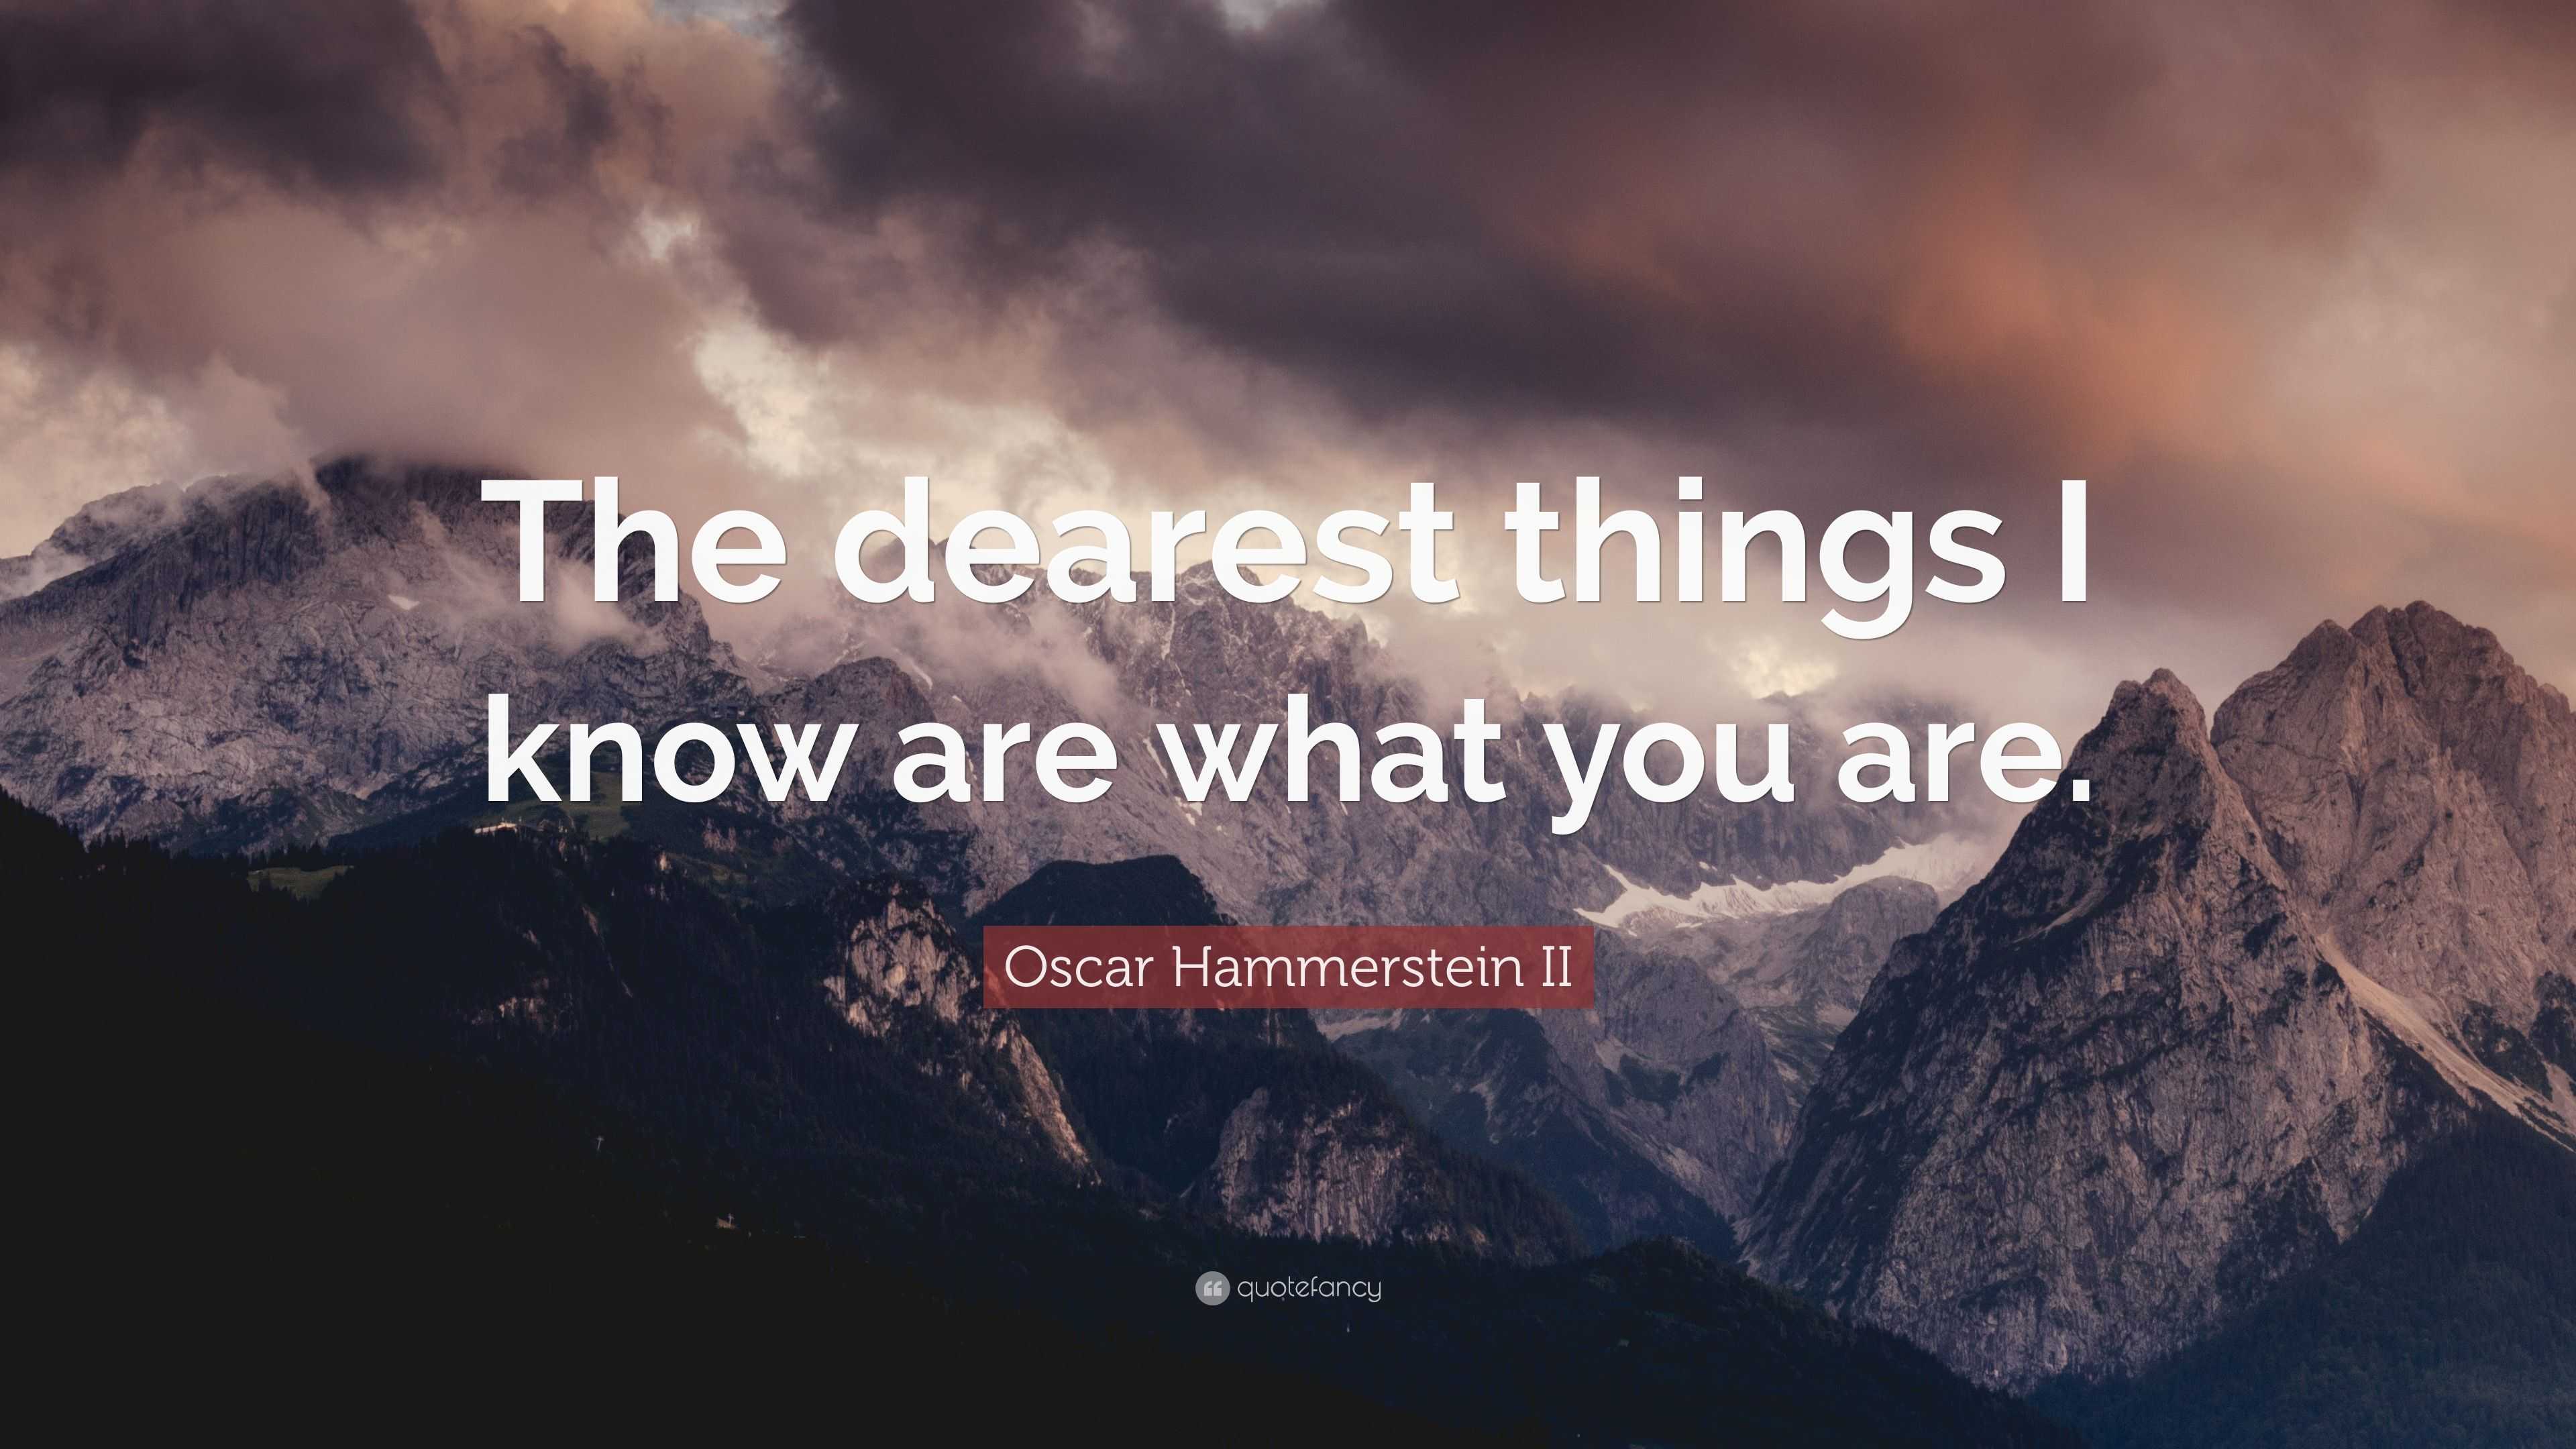 Oscar Hammerstein II Quote: “These are a few of my favorite things.”